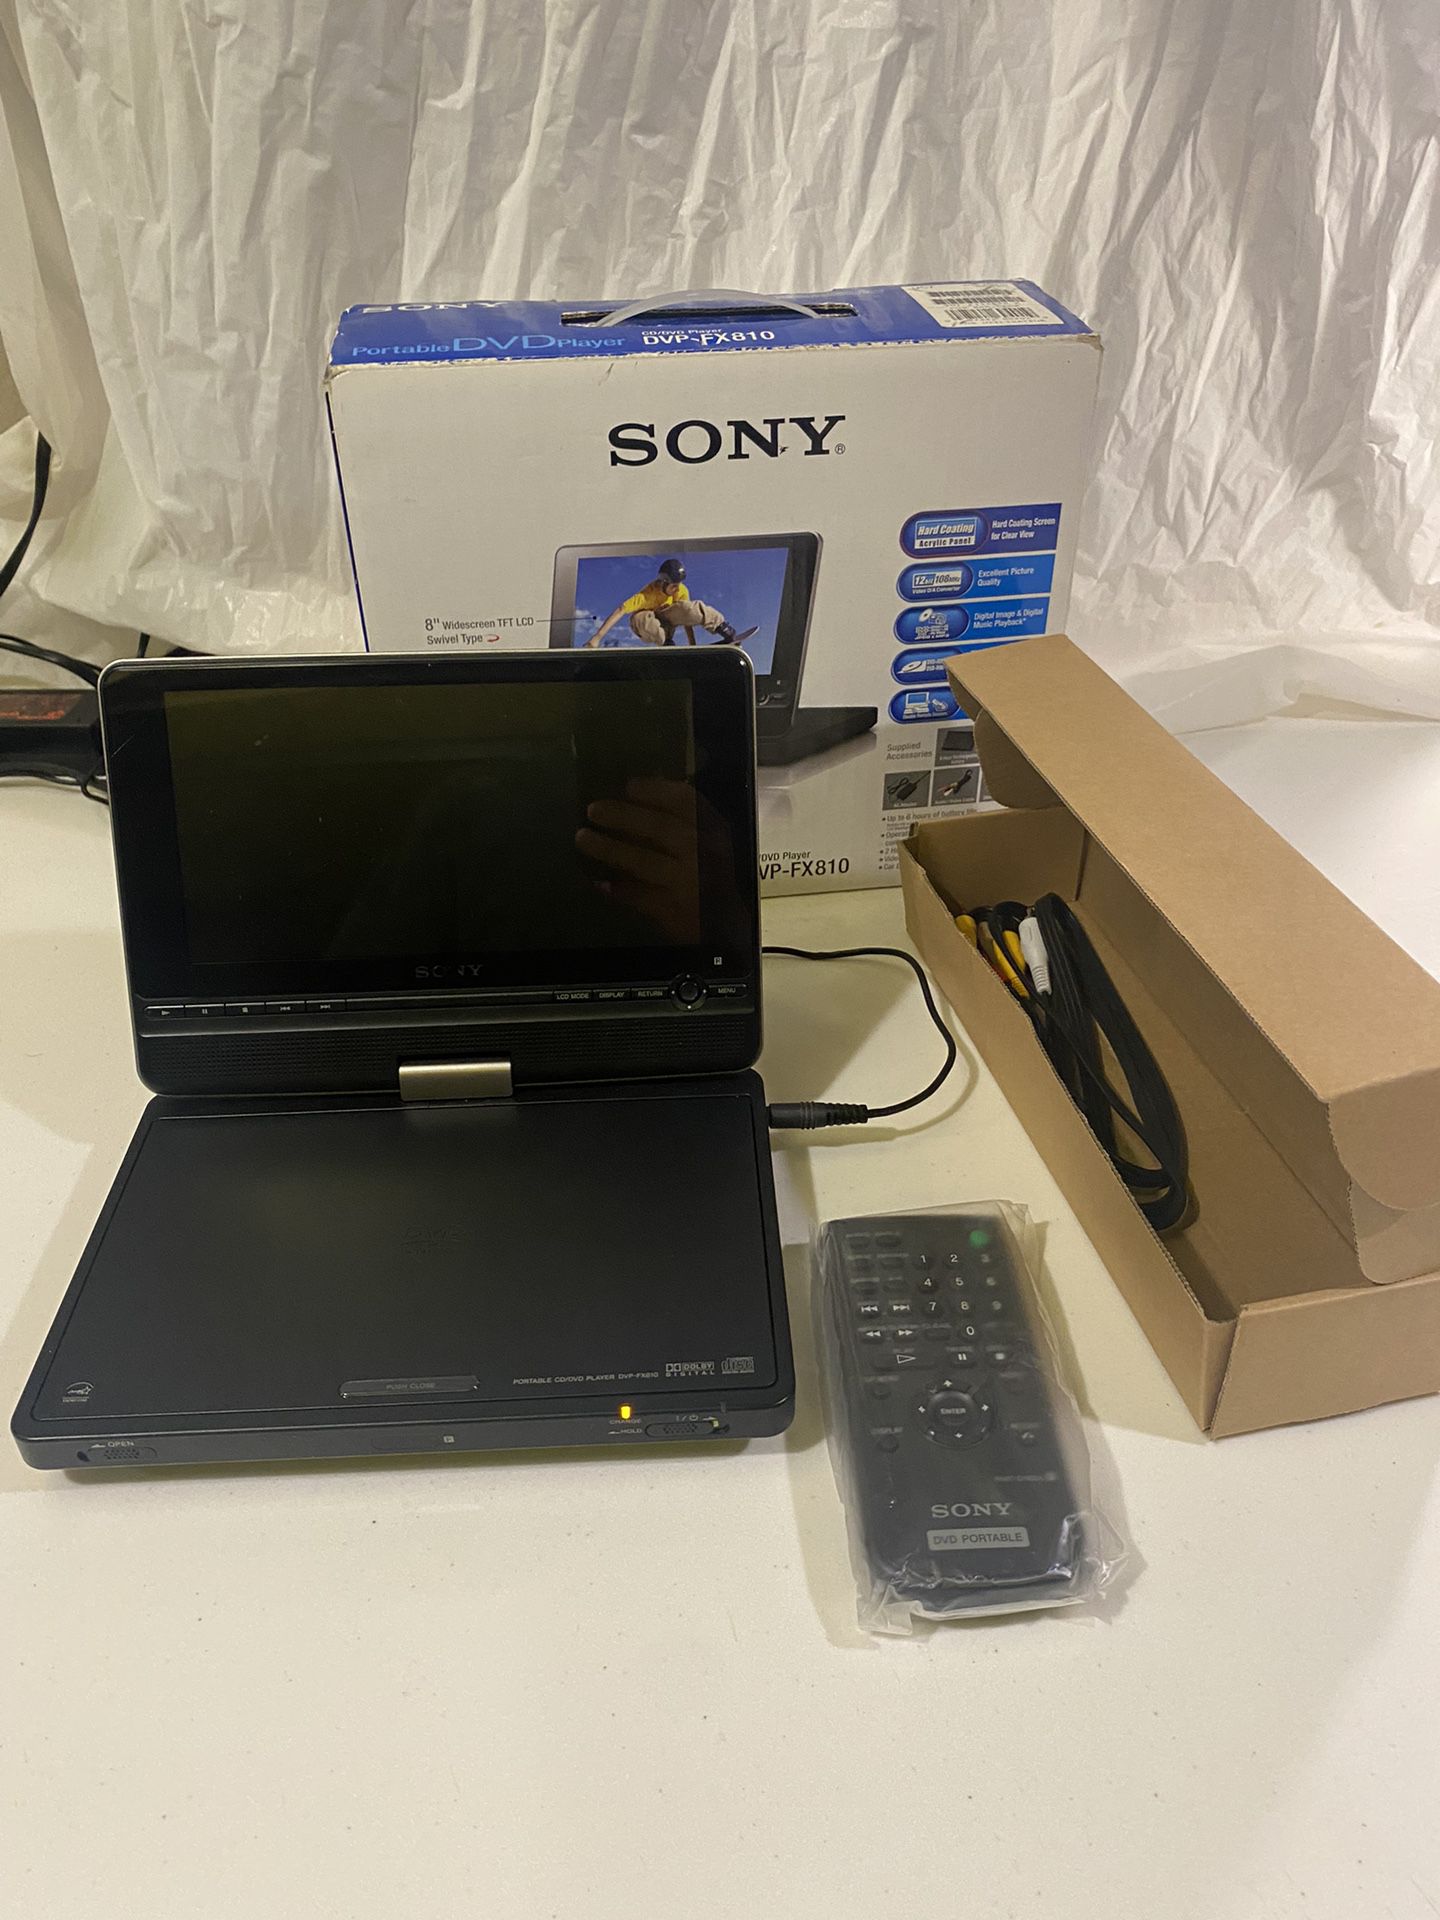 Sony Portable DVD Player DVP-FX810 w/ Battery Pack, Av And Power Cable